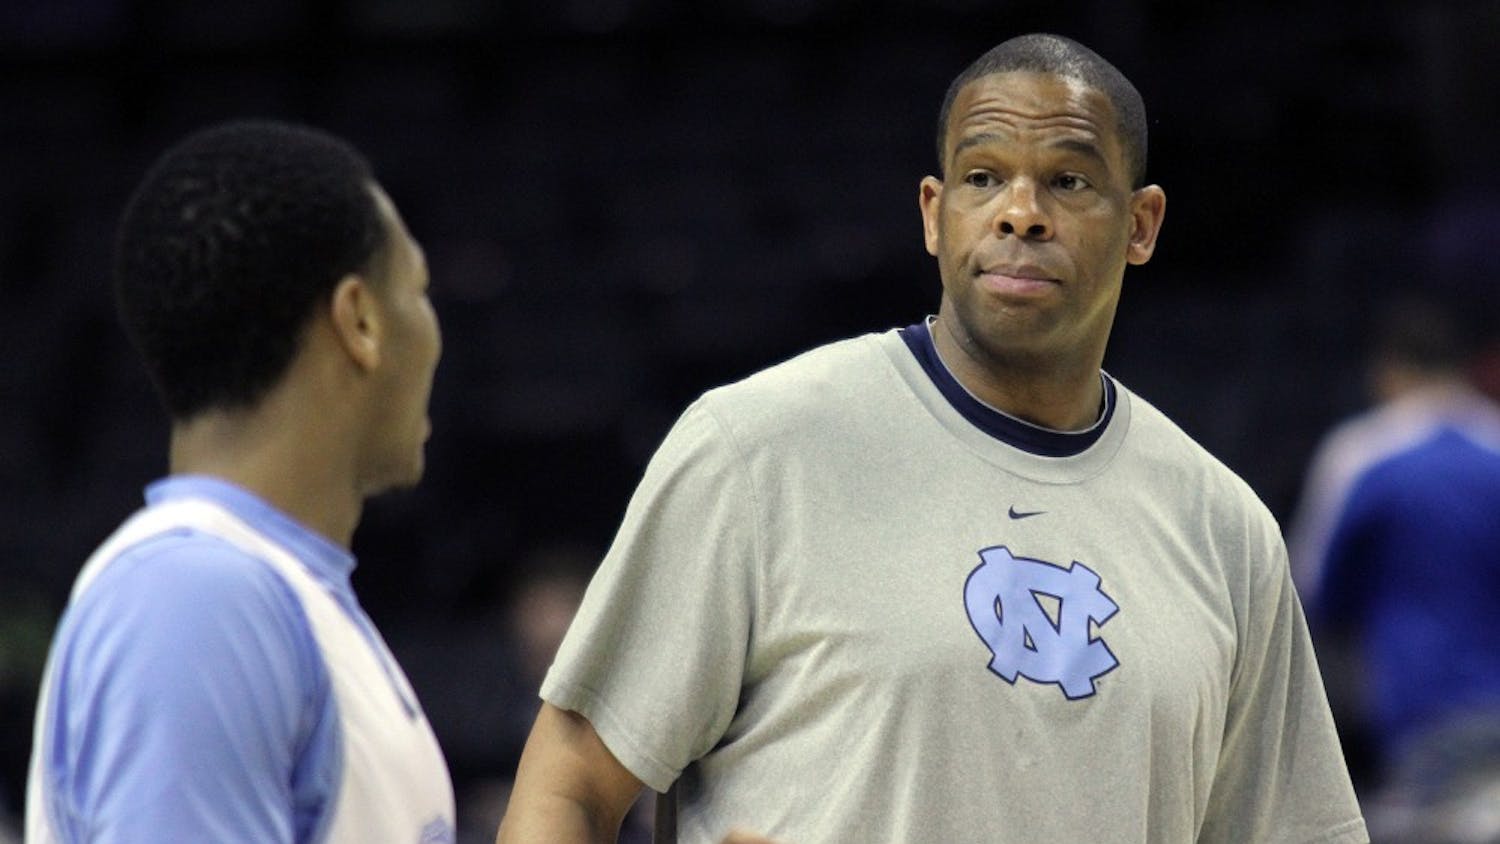 Assistant coach Hubert Davis raises his eyebrows at Nate Britt during practice. The UNC men's basketball team held an open practice at the AT&T Center in San Antonio on Thursday. The Tar Heels will face Providence in the second round of the NCAA tournament on Friday.